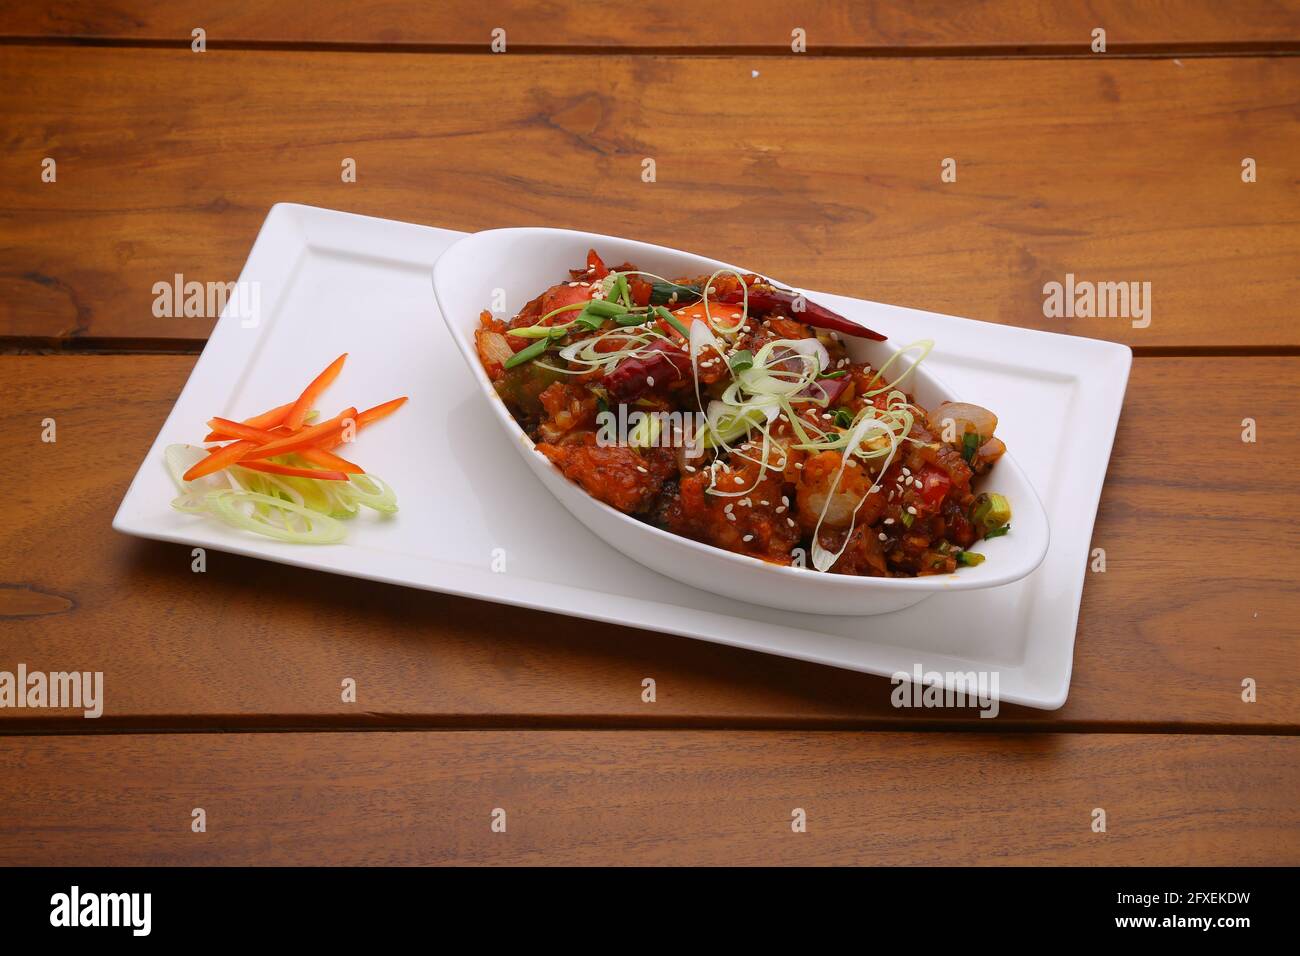 Chilli Chicken dry,well garnished and arranged in an oval shaped bowl on a white serving plate with wooden texture Stock Photo